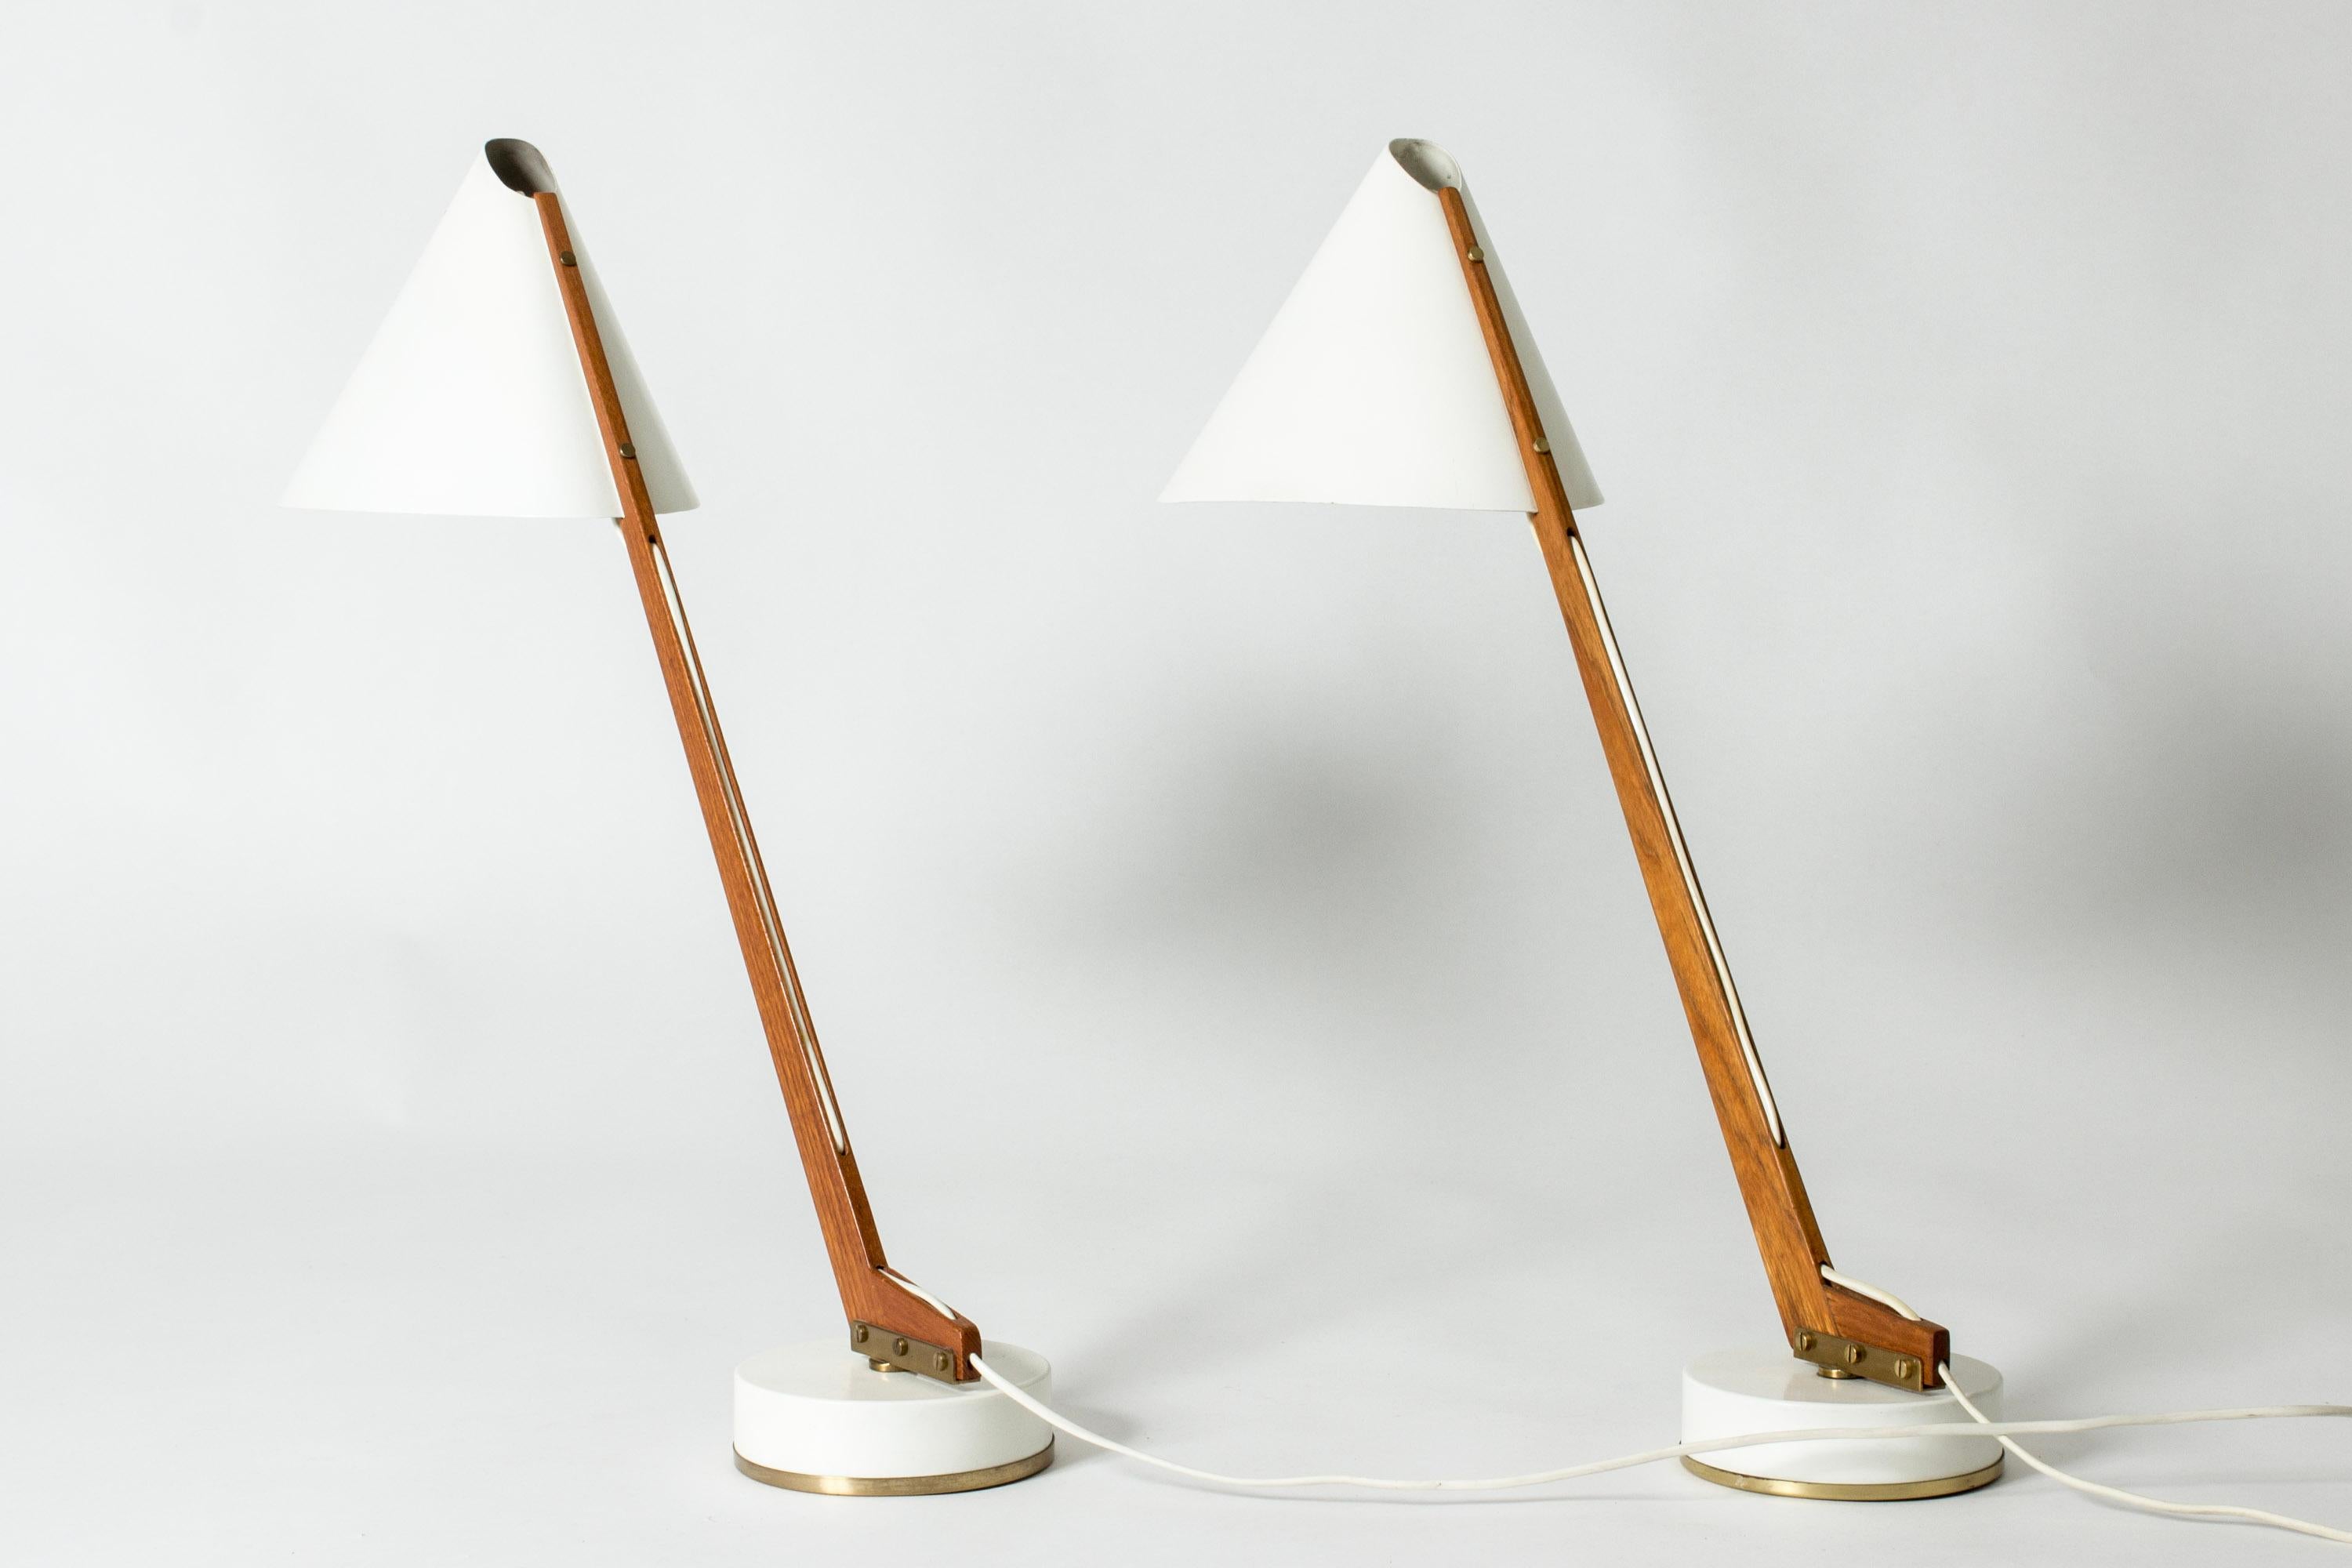 Pair of striking desk lamps by Hans-Agne Jakobsson, with teak stems and lacquered white shades and bases. Decorative brass details.